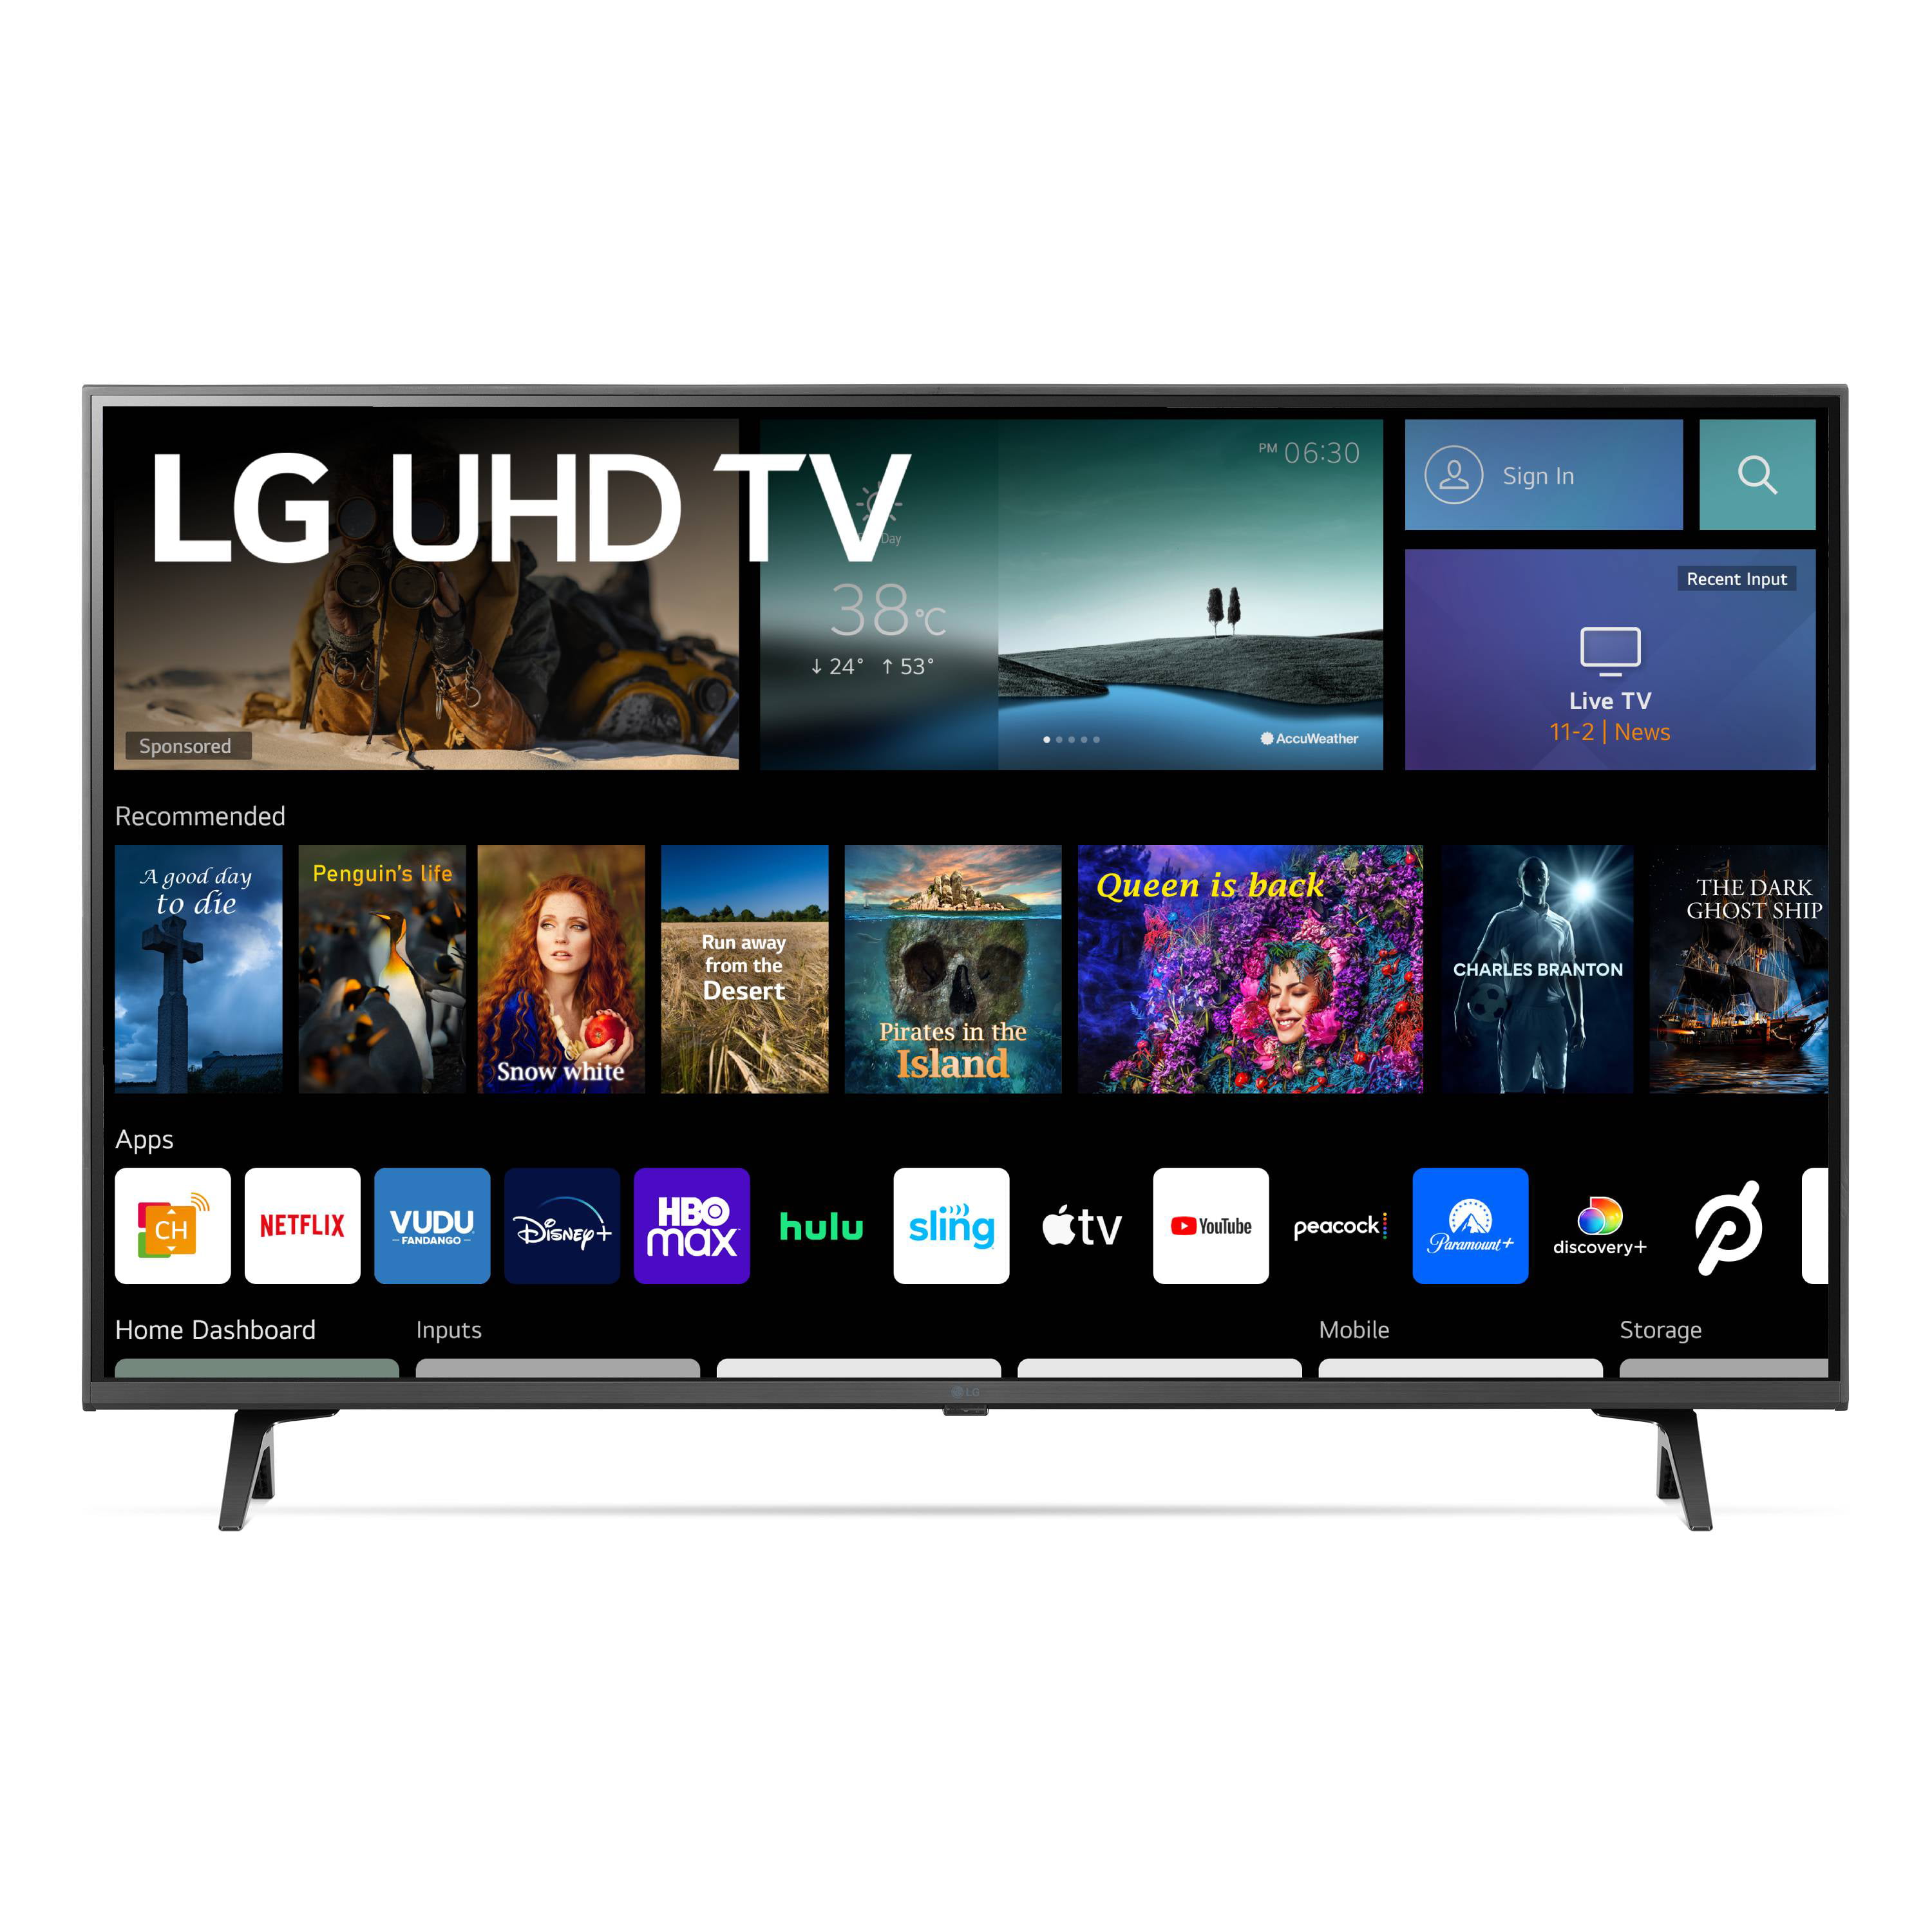 How to Restart Your LG TV? 15